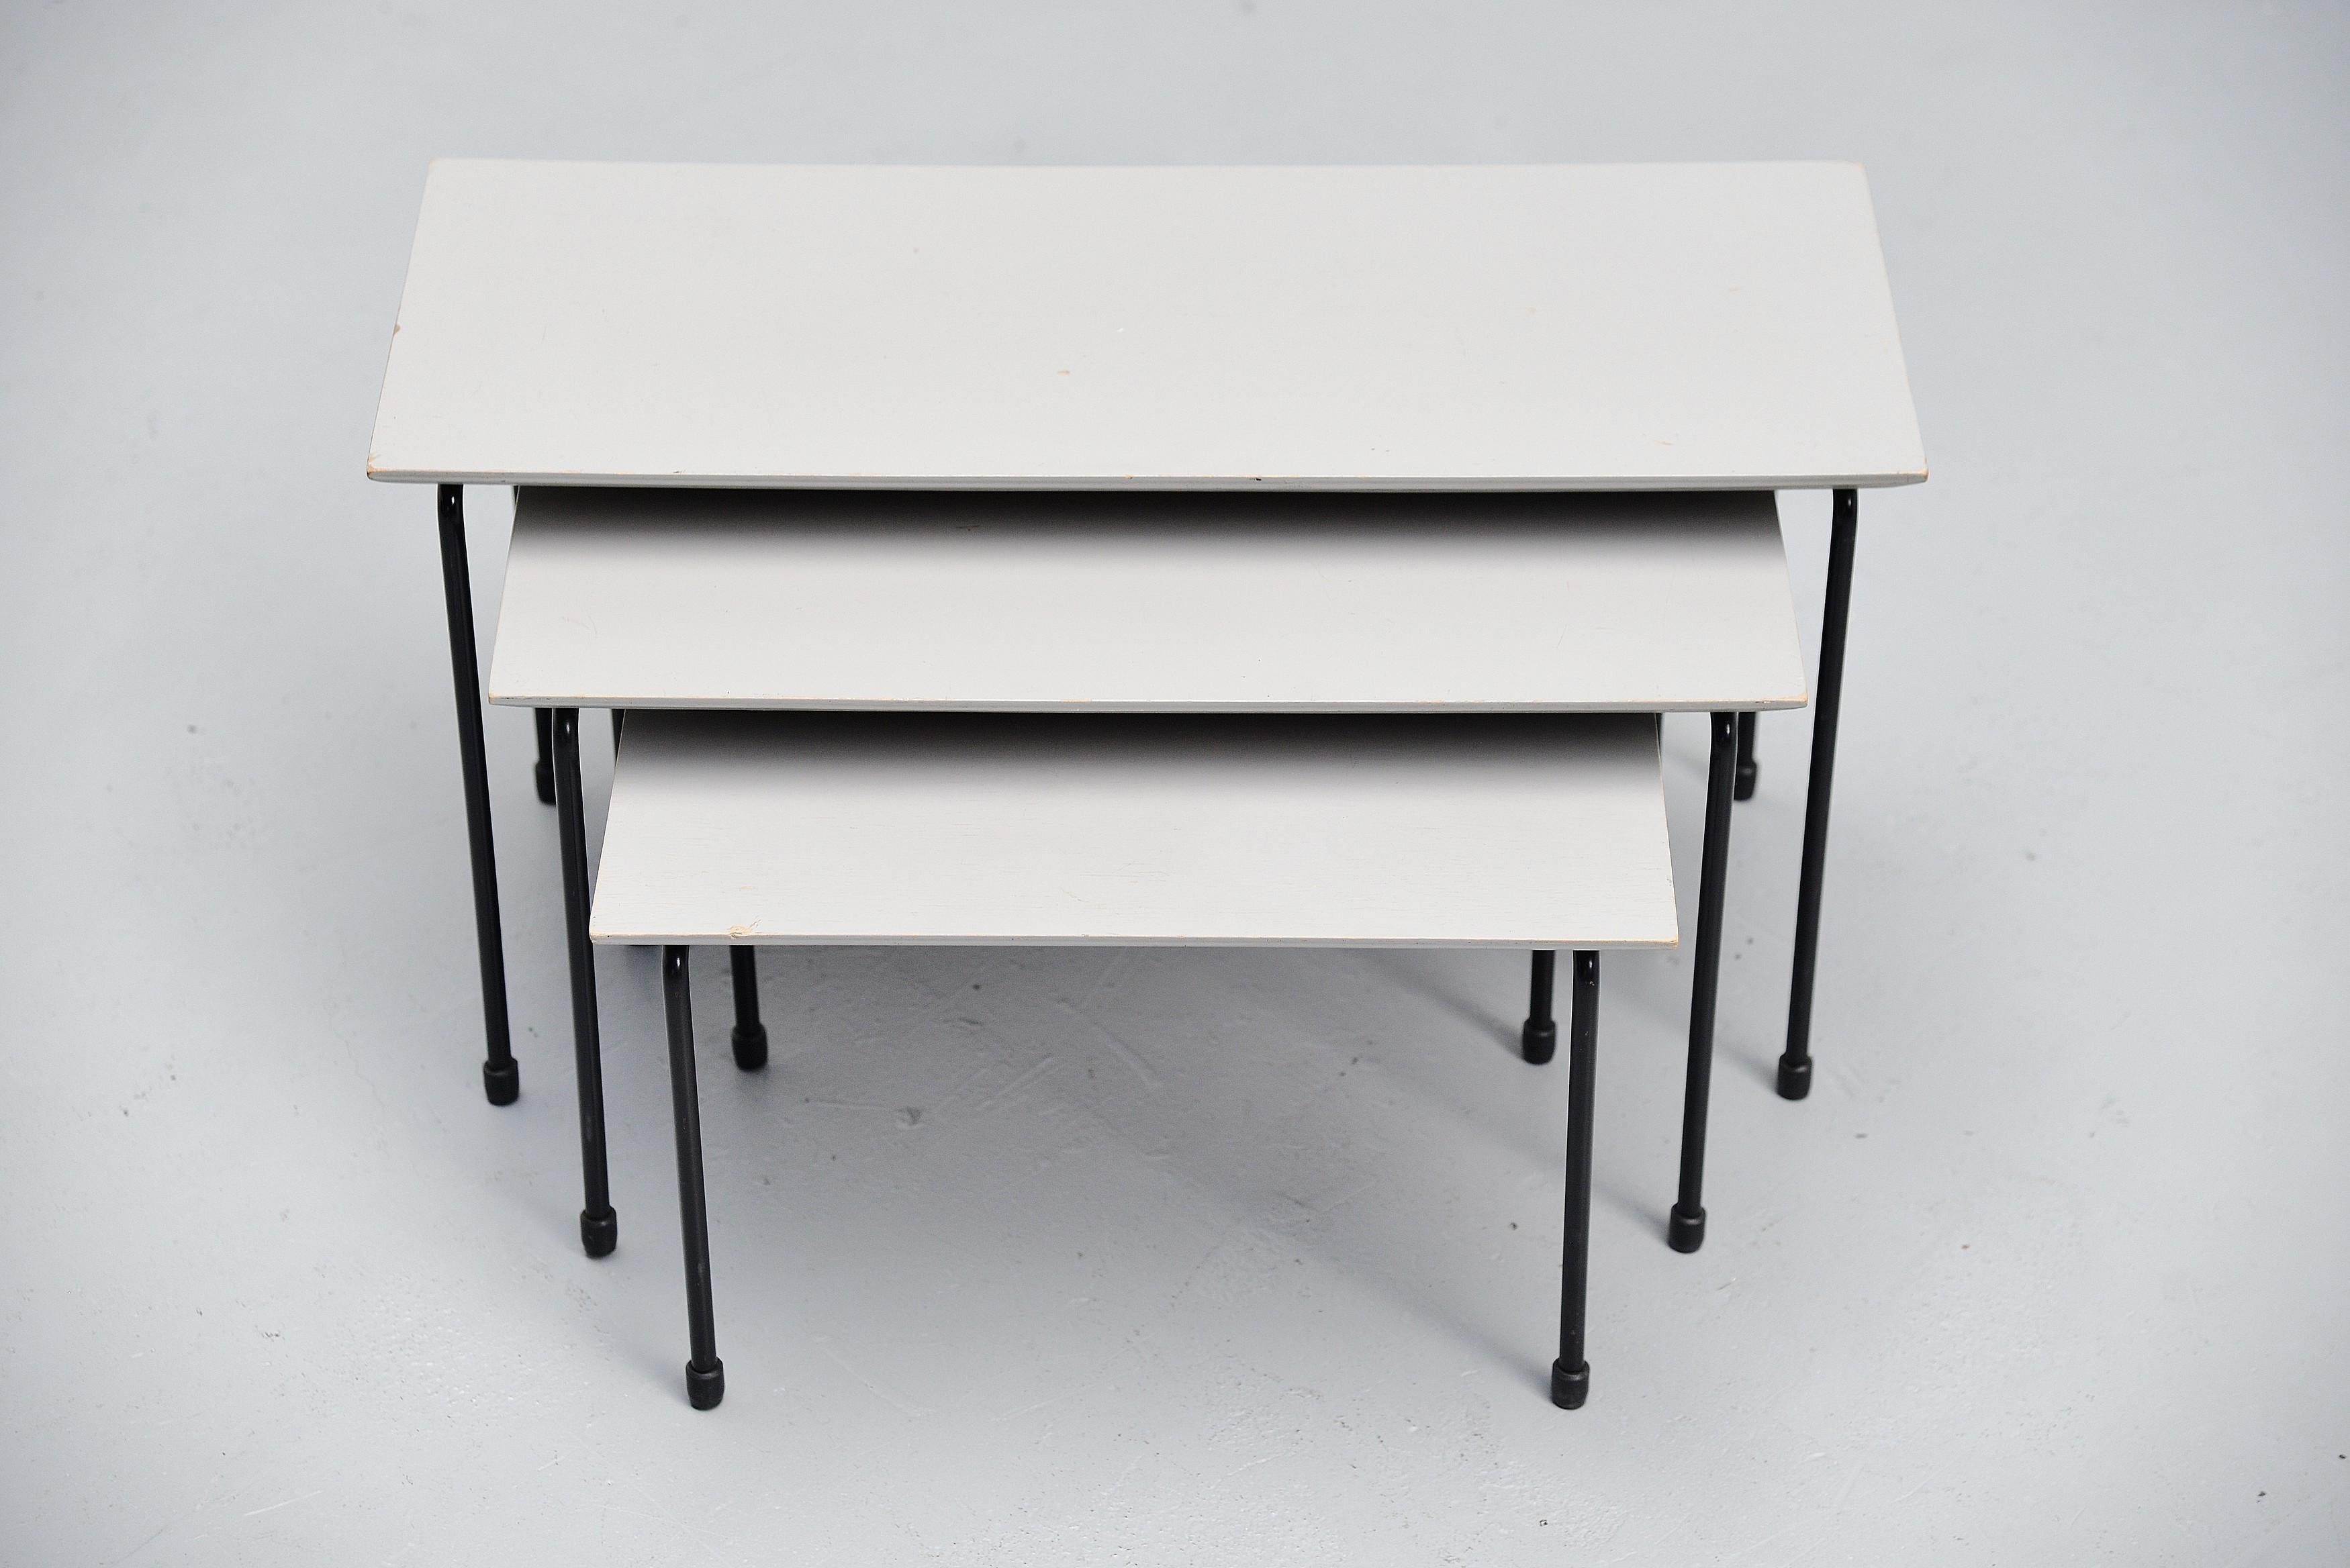 Rare modernist nesting table set designed by Martin Visser and manufactured by 't Spectrum, Holland 1956. This rare nesting table set is from the first production in 1956, it was only produced until 1957. The tables have very nice grey painted